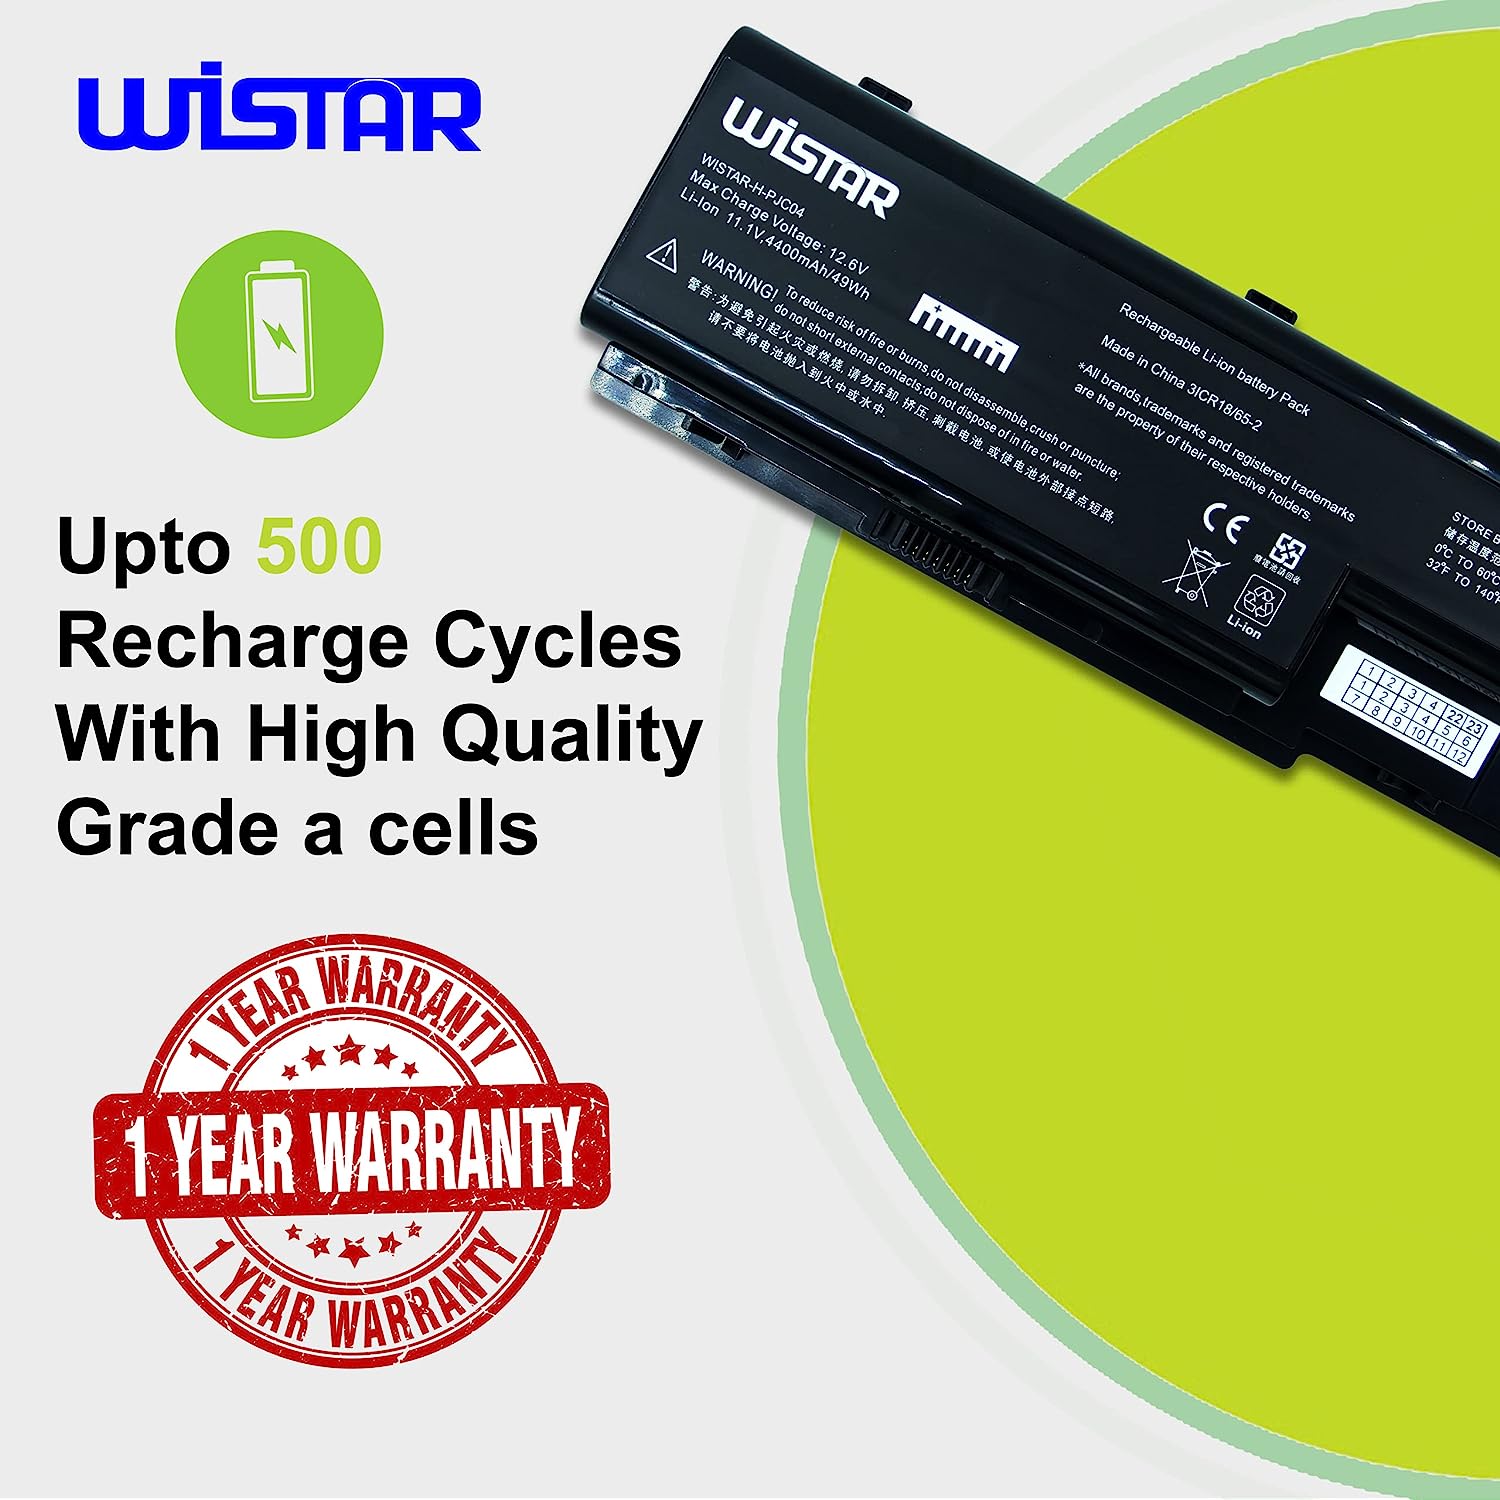 WISTAR Laptop Battery for ACER Aspire 5520 5720 5920 5930 6920 7230 7540 AS07B31 AS07B32 AS07B41 Black